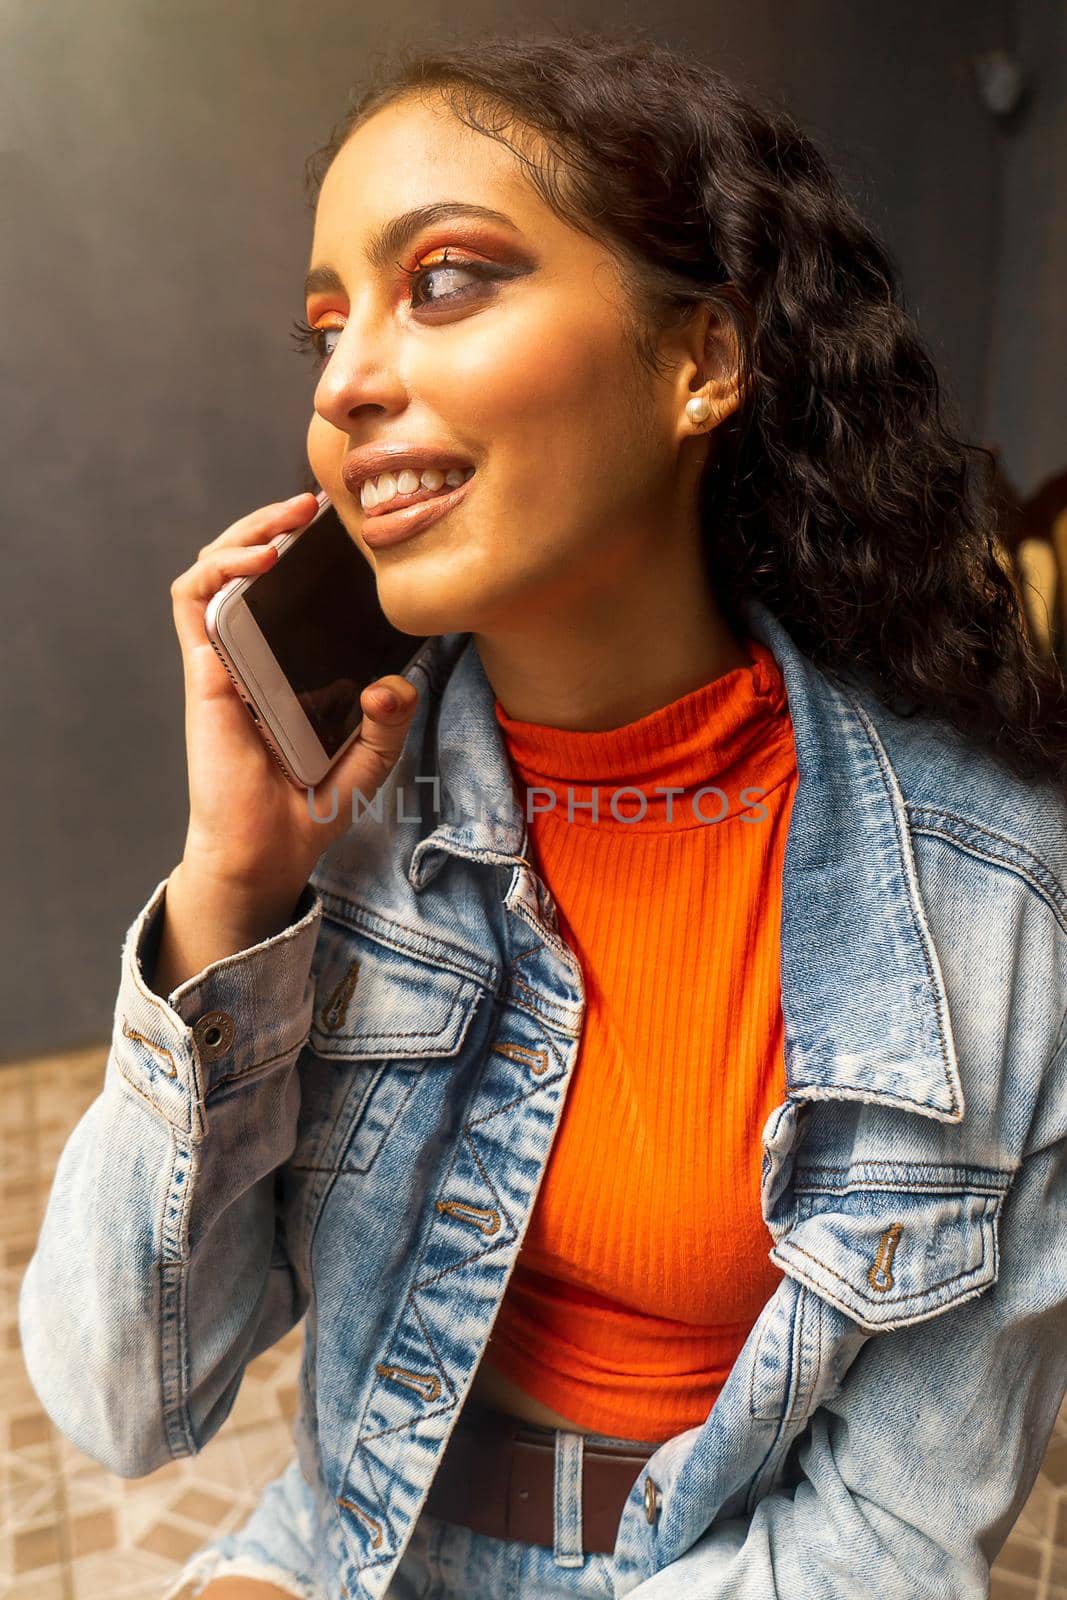 Latin teen gossiping on her cell phone making a phone call indoors at home.